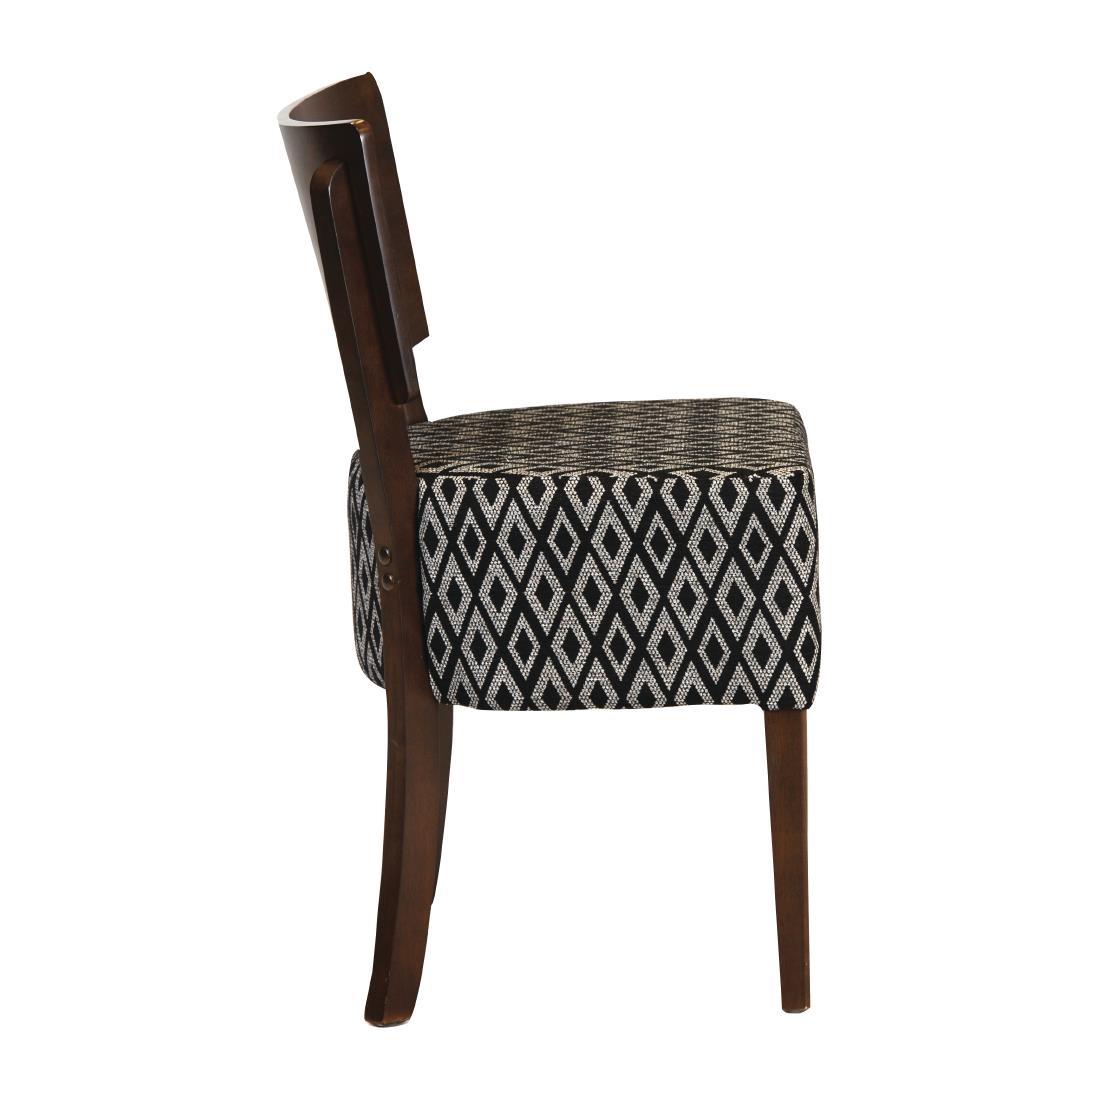 Asti Padded Dark Walnut Dining Chair with Blue Diamond Deep Padded Seat and Back (Pack of 2) - FT422  - 3